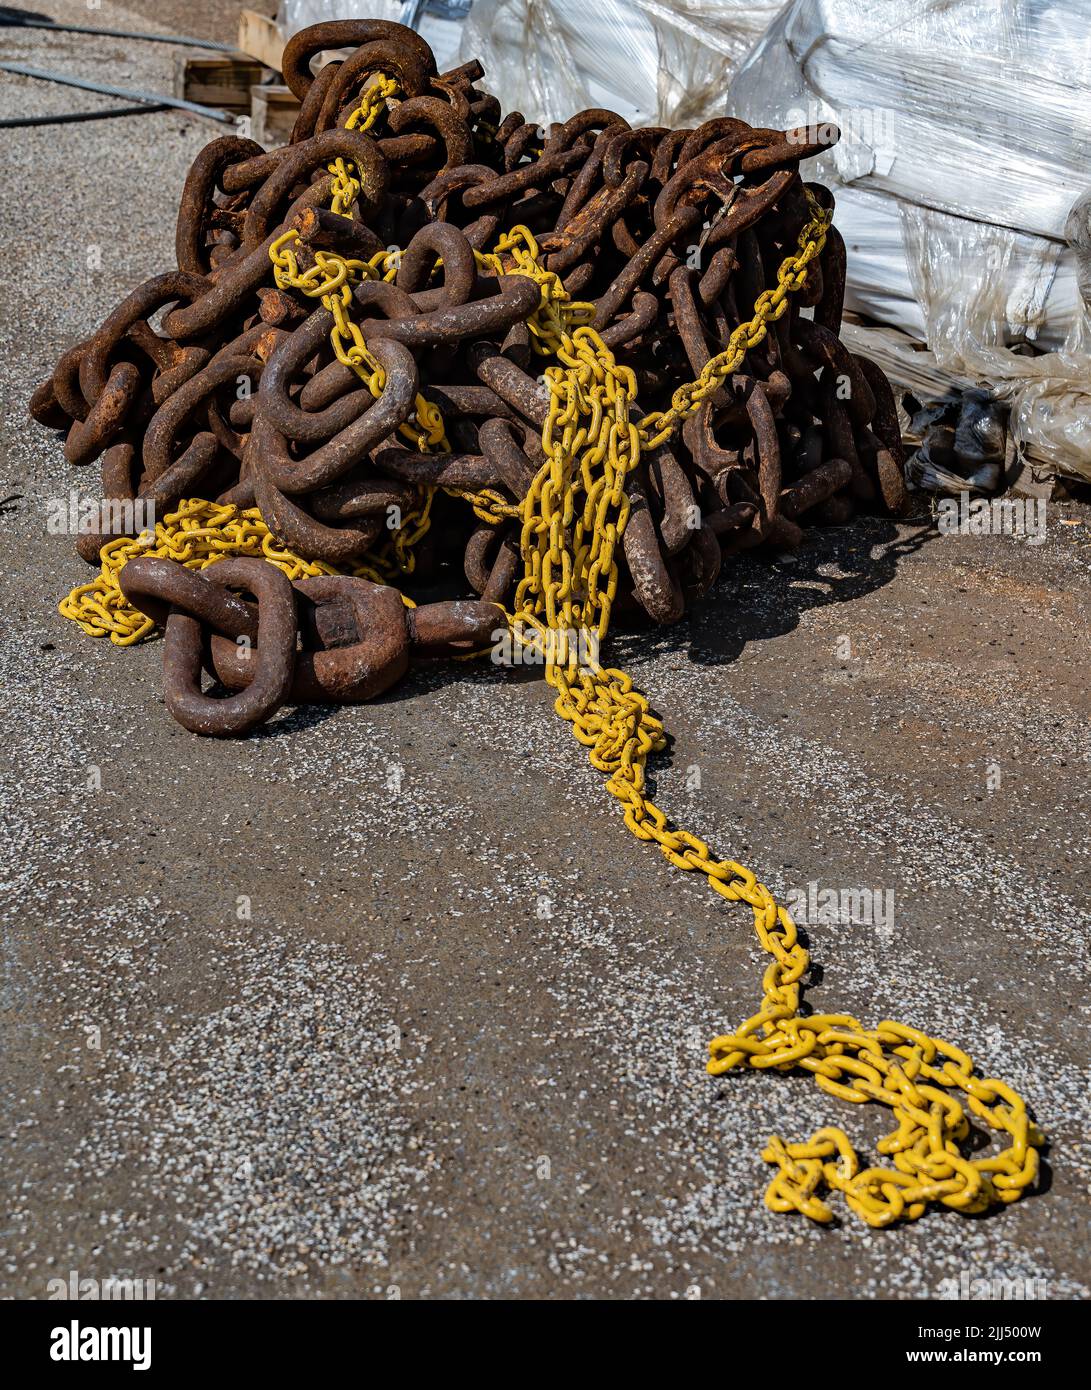 SCARBOROUGH,  NORTH YORKSHIRE, UK - JULY 18: Rusty chain in Scarborough, North Yorkshire on July 18, 2022 Stock Photo